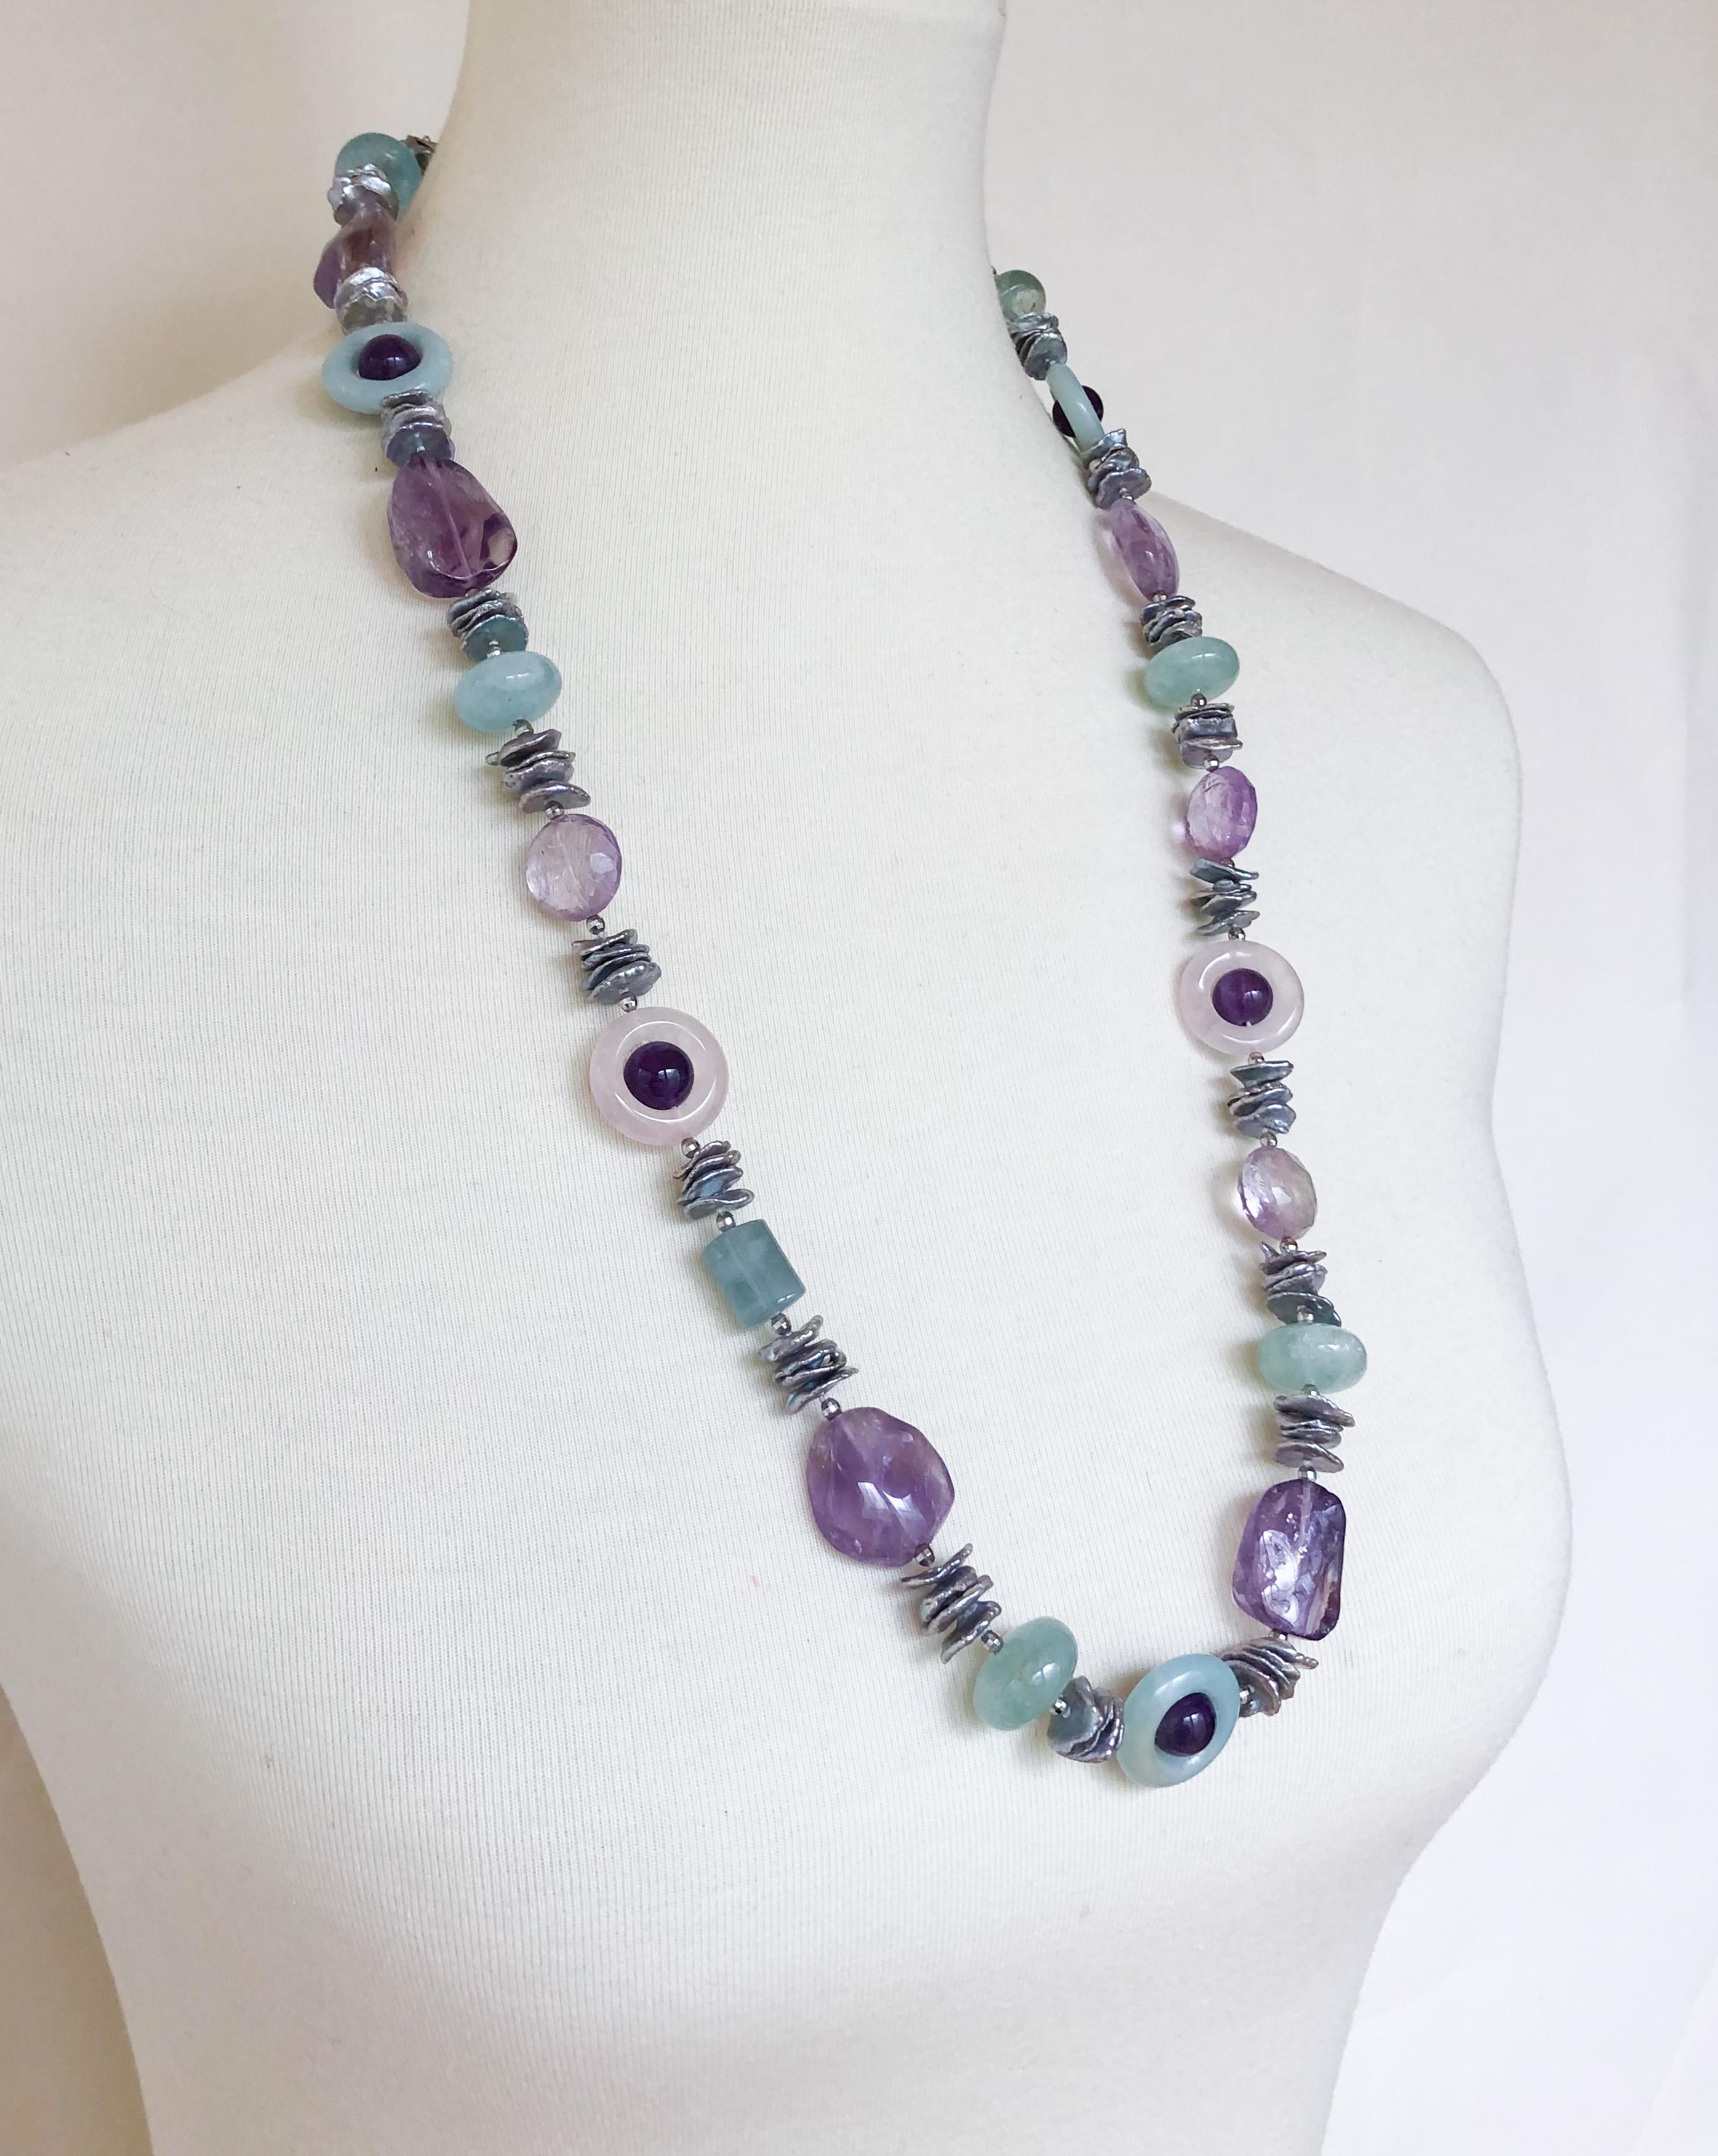 Gorgeous stone necklace by Marina J. This lovely piece is made using multi shaped faceted Amethysts, Rose Quartz, Aquamarine, Amazenite and Freshwater irregular shaped Grey Pearls which display a vivid iridescent sheen. Due to the translucent nature